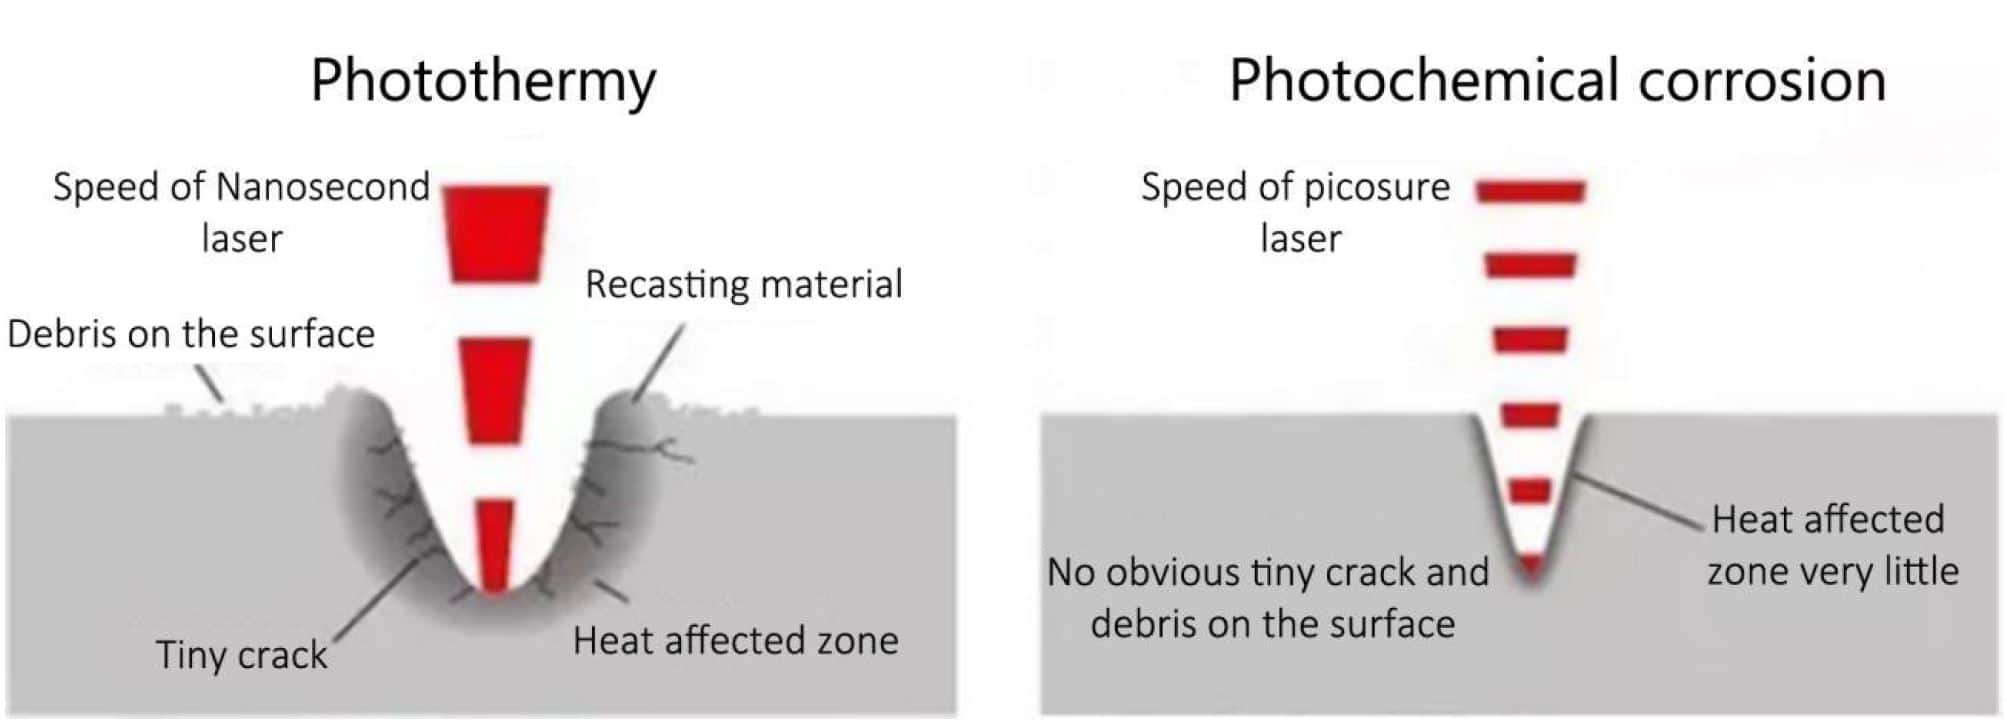 The difference between nanosecond and picosecond lasers